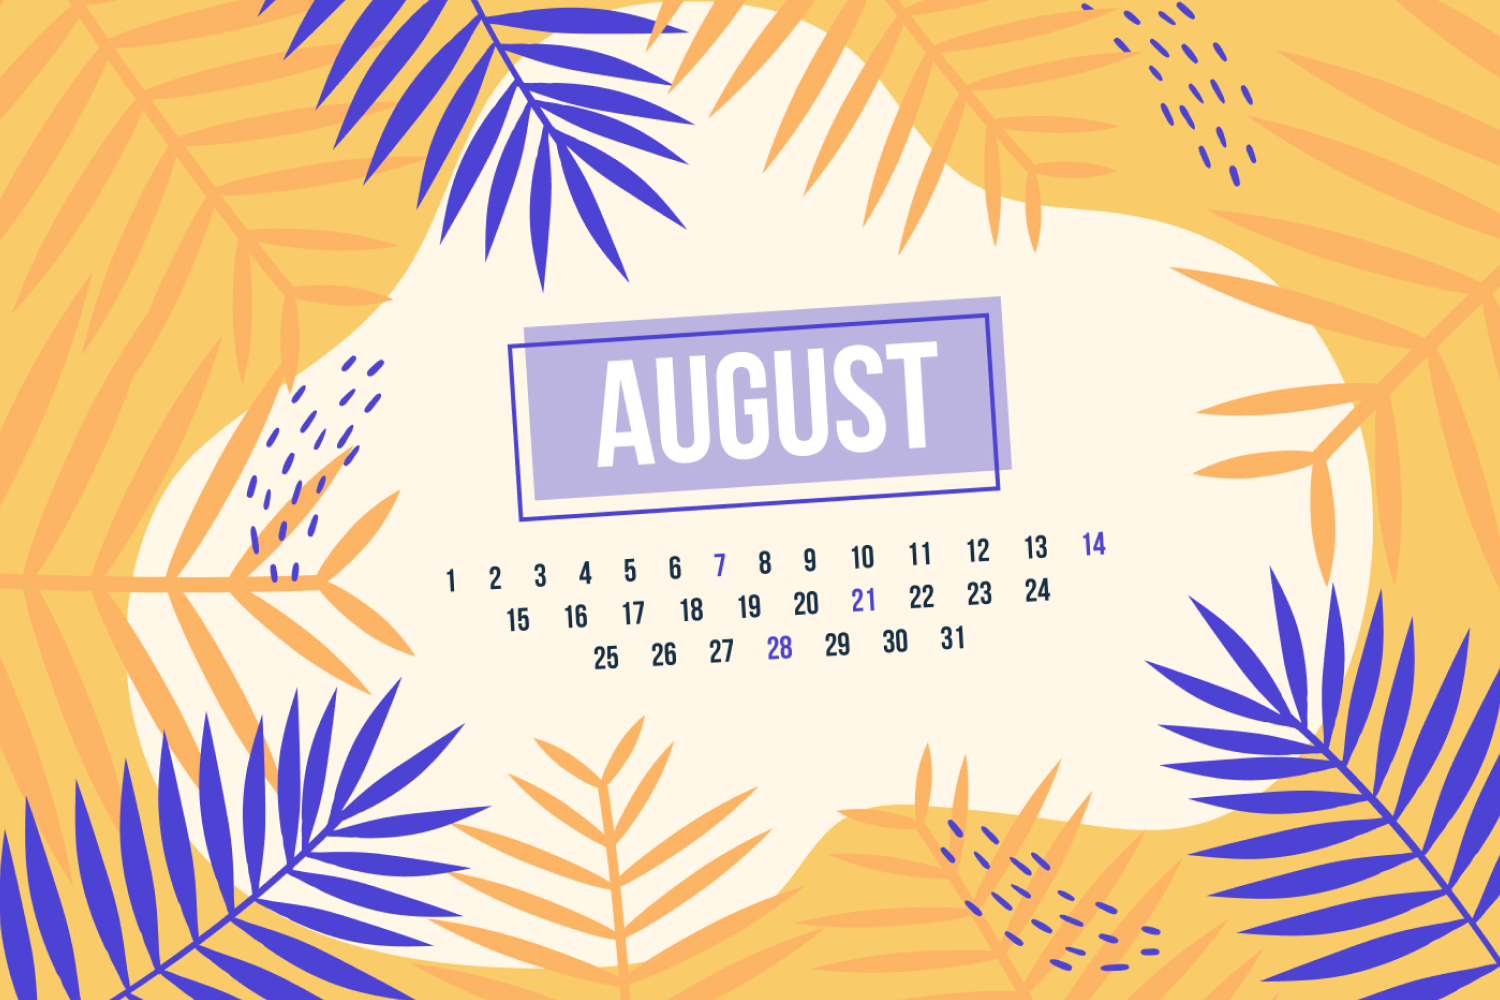 Calendar for august inside a frame of yellow and blue fern leaves.